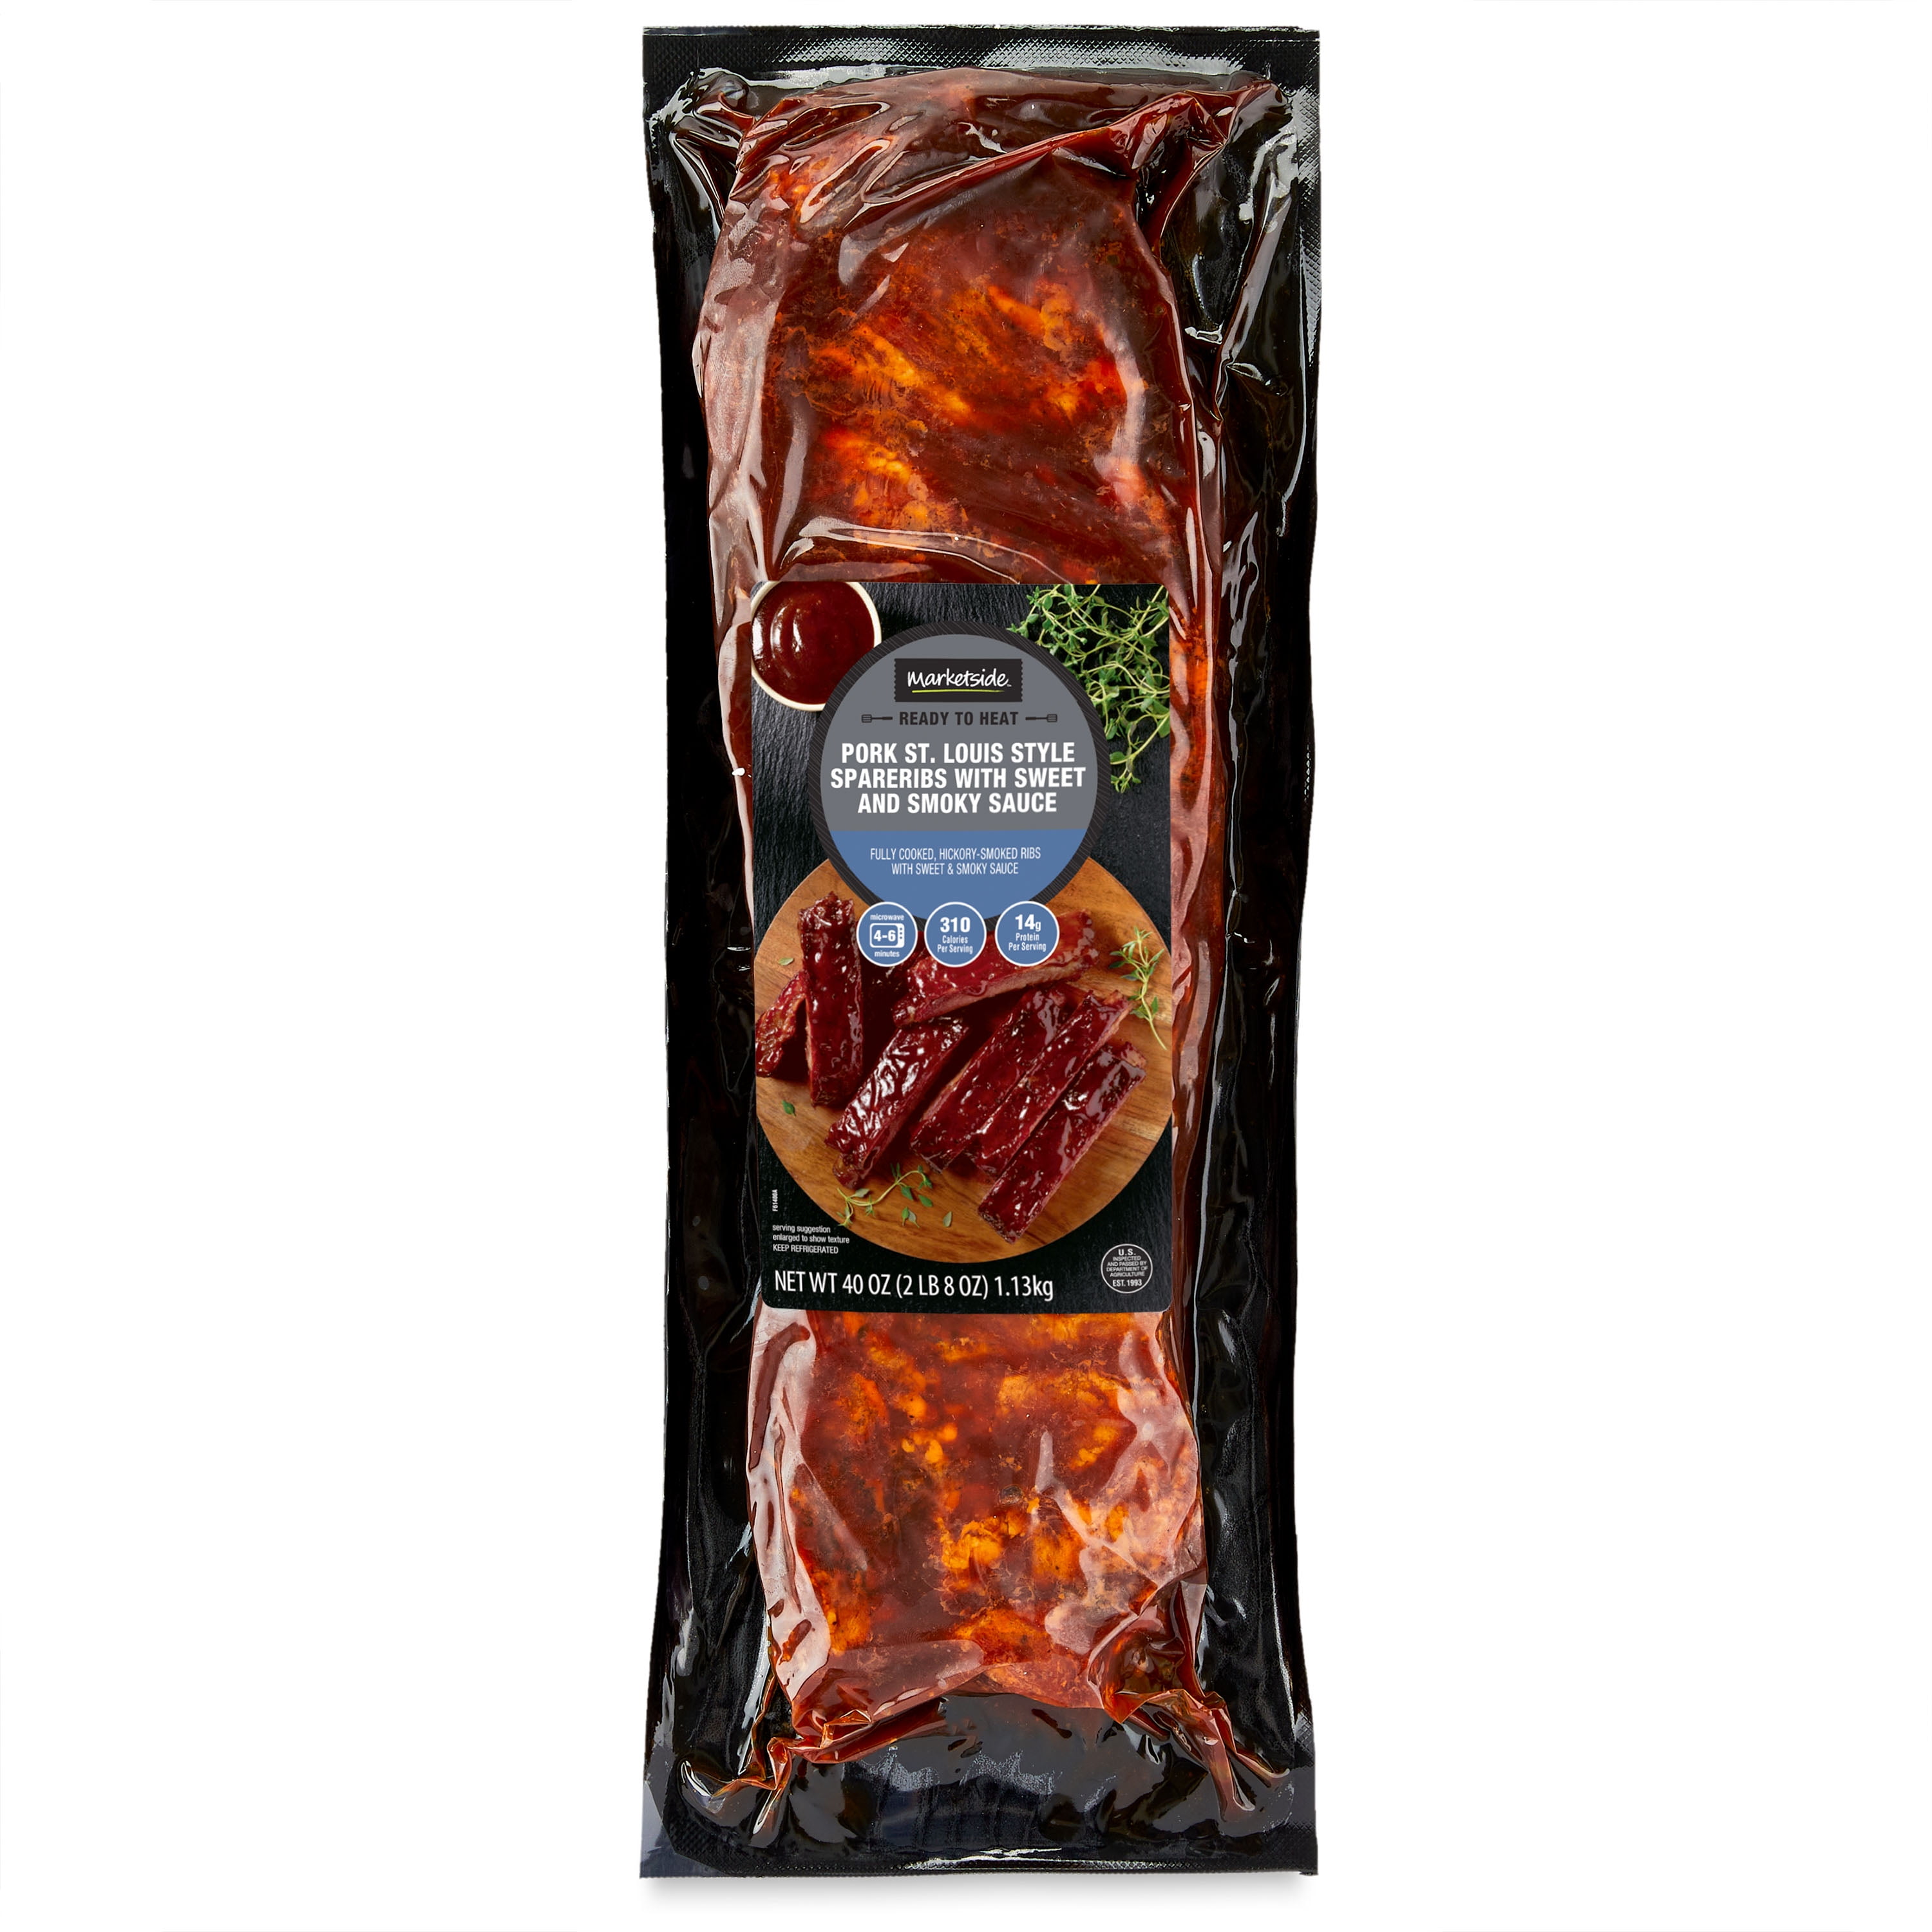 Marketside Ready-to-Heat Packaged Meals Smoked St. Louis Style Pork Spareribs, 2.5 lbs.